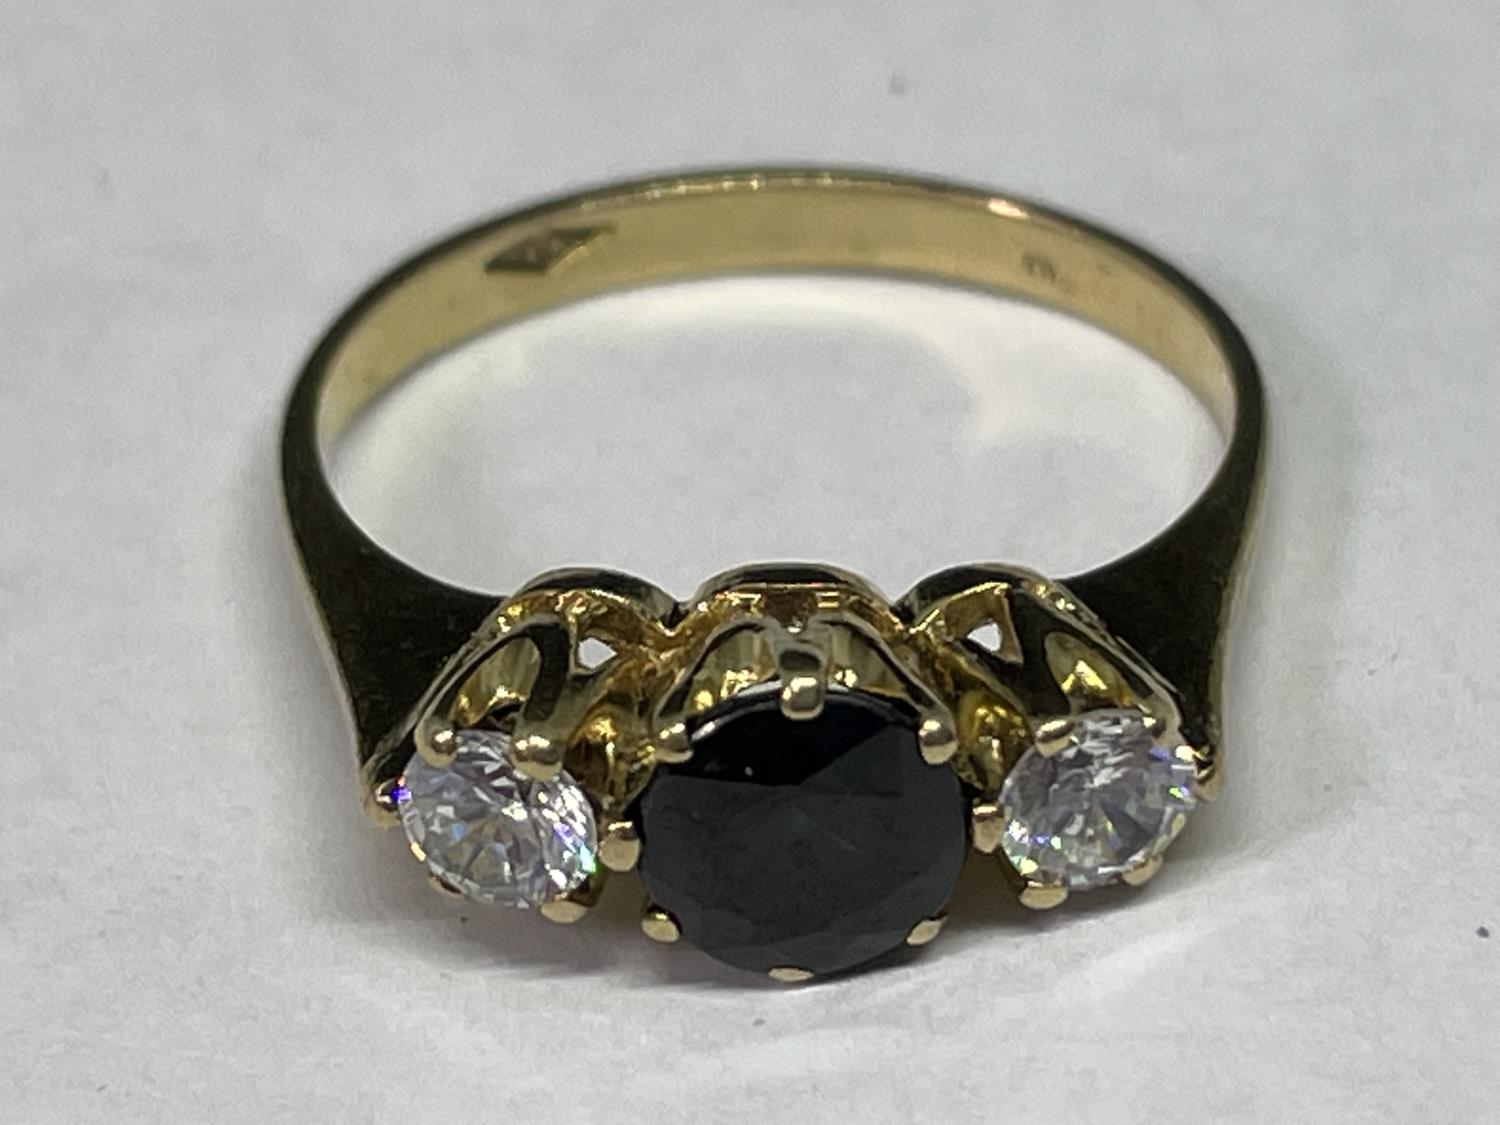 A TESTED TO 9 CARAT GOLD RING WITH CENTRE SAPPHIRE AND A CLEAR STONE EACH SIDE